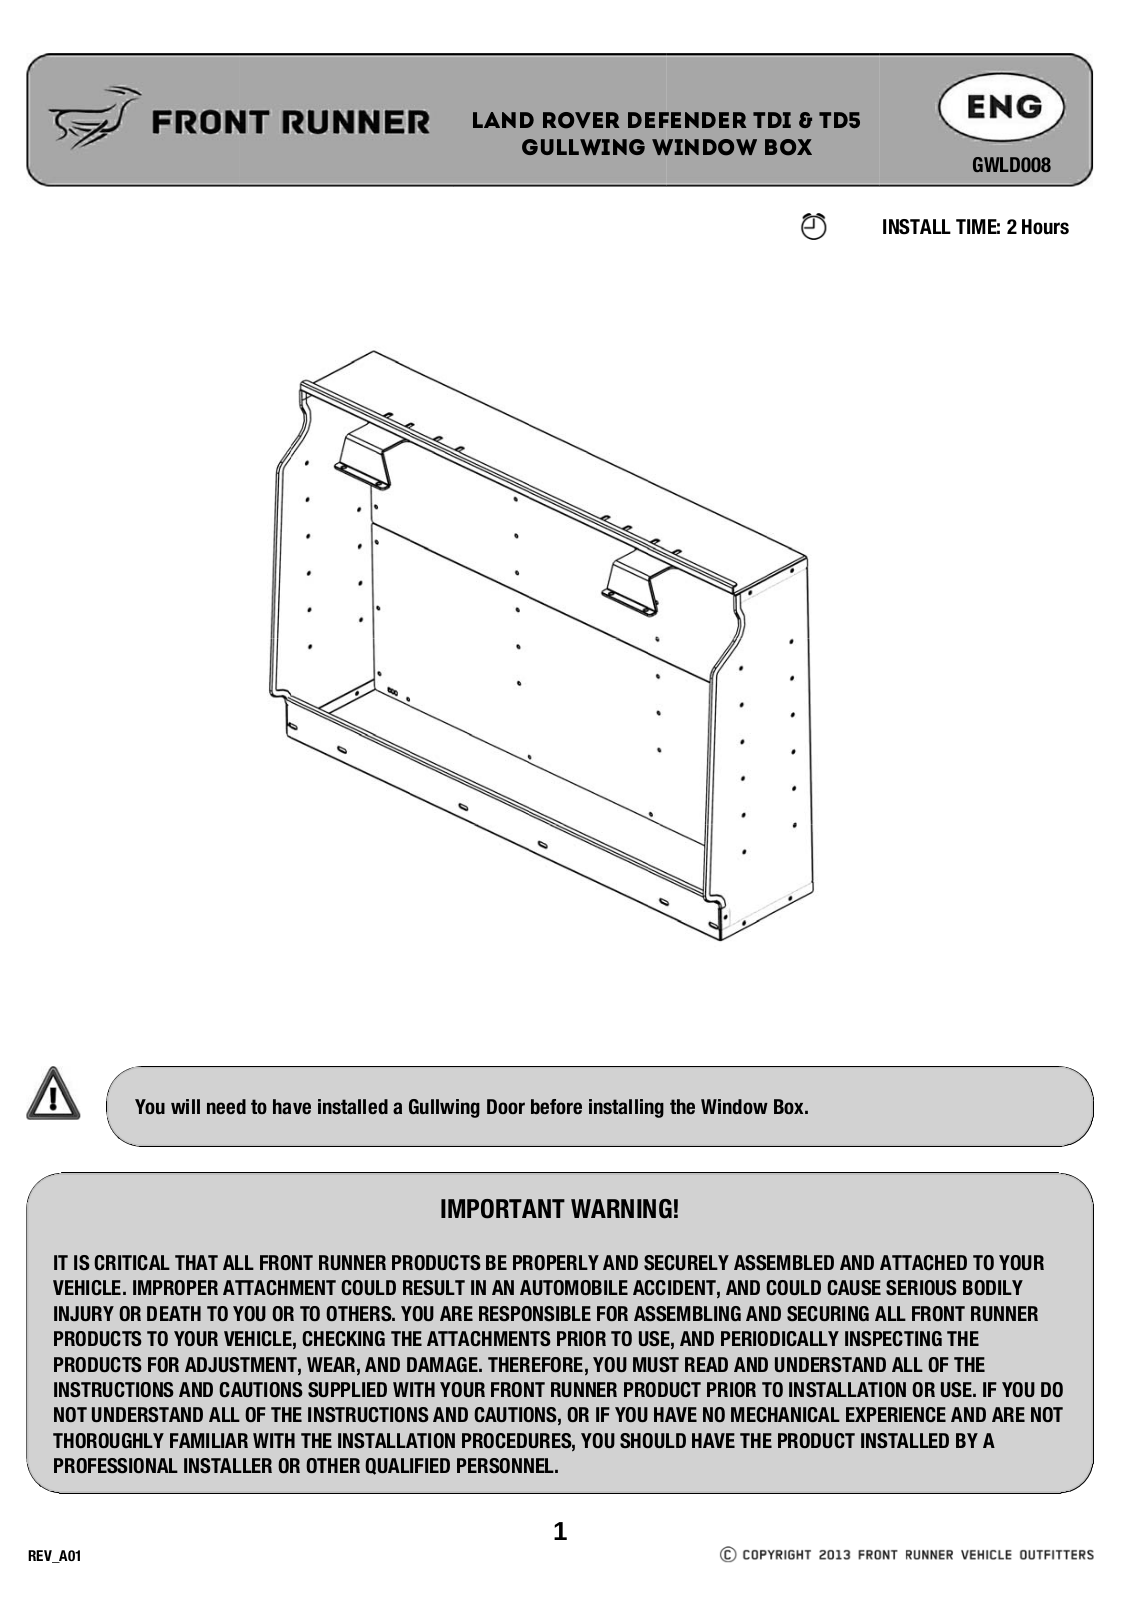 Installation instructions for GWLD008